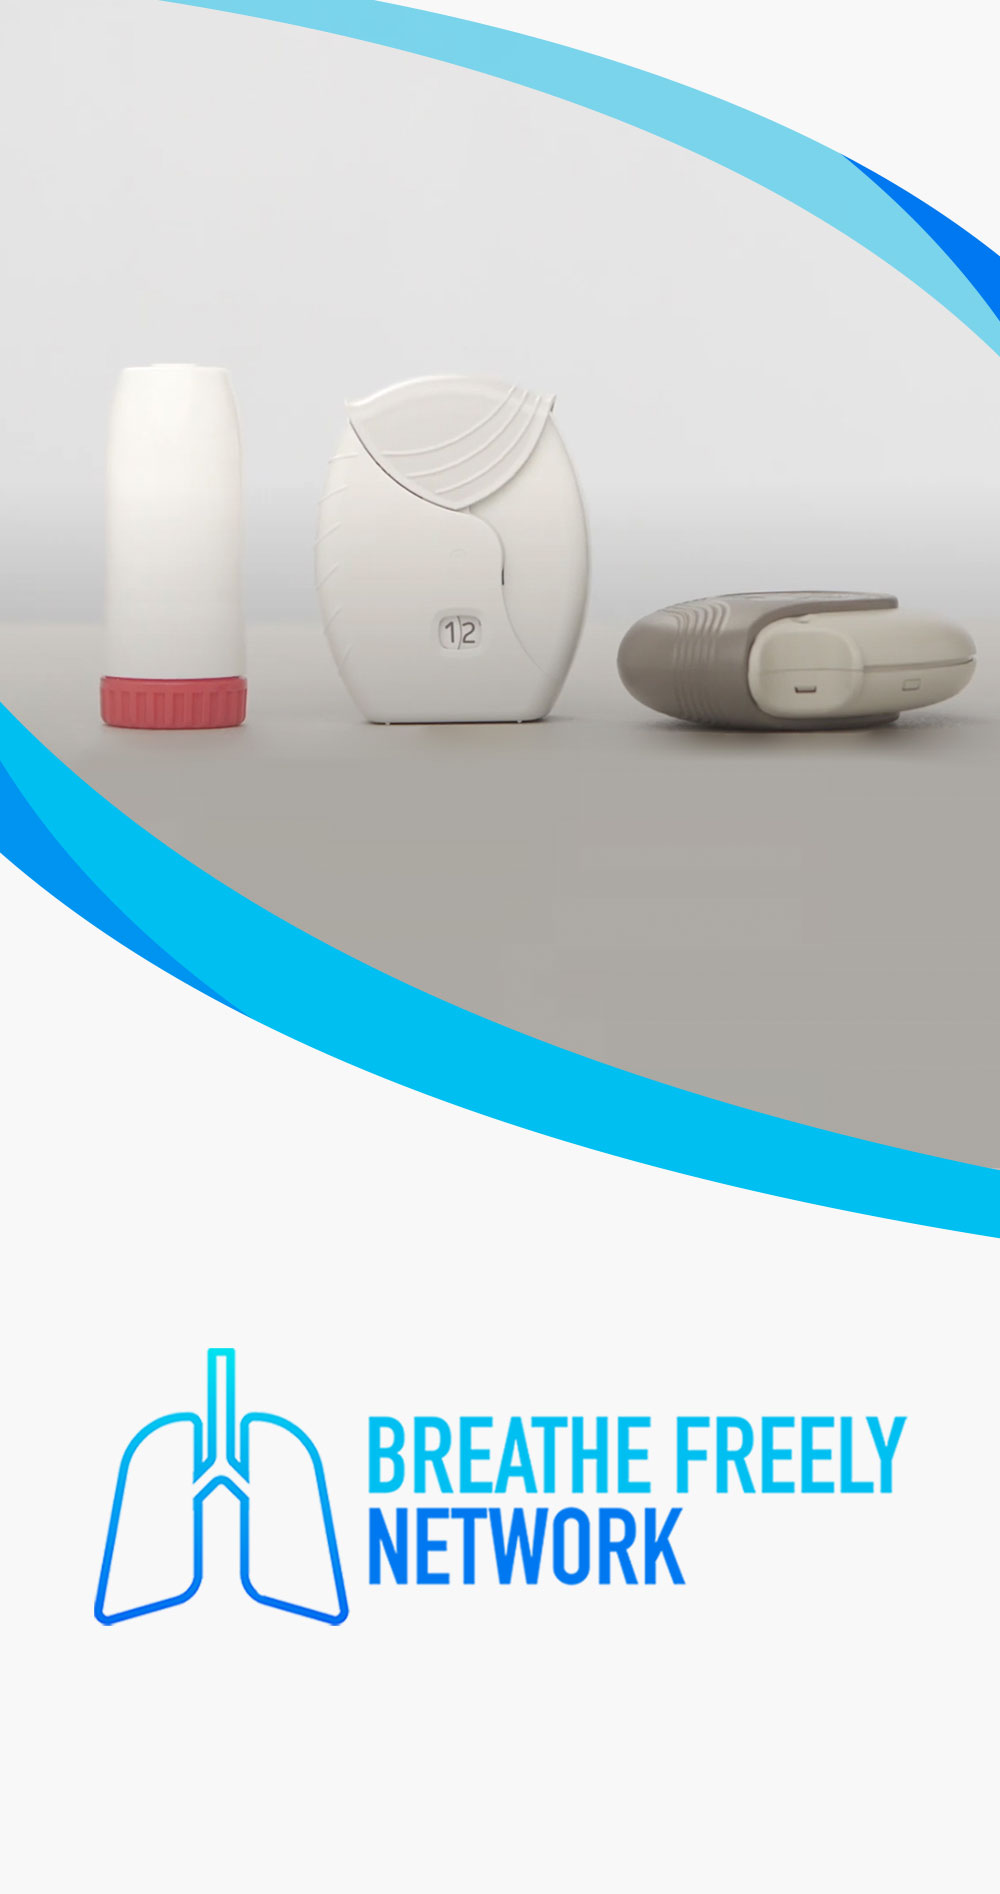 how to use dry powder inhaler device correctly